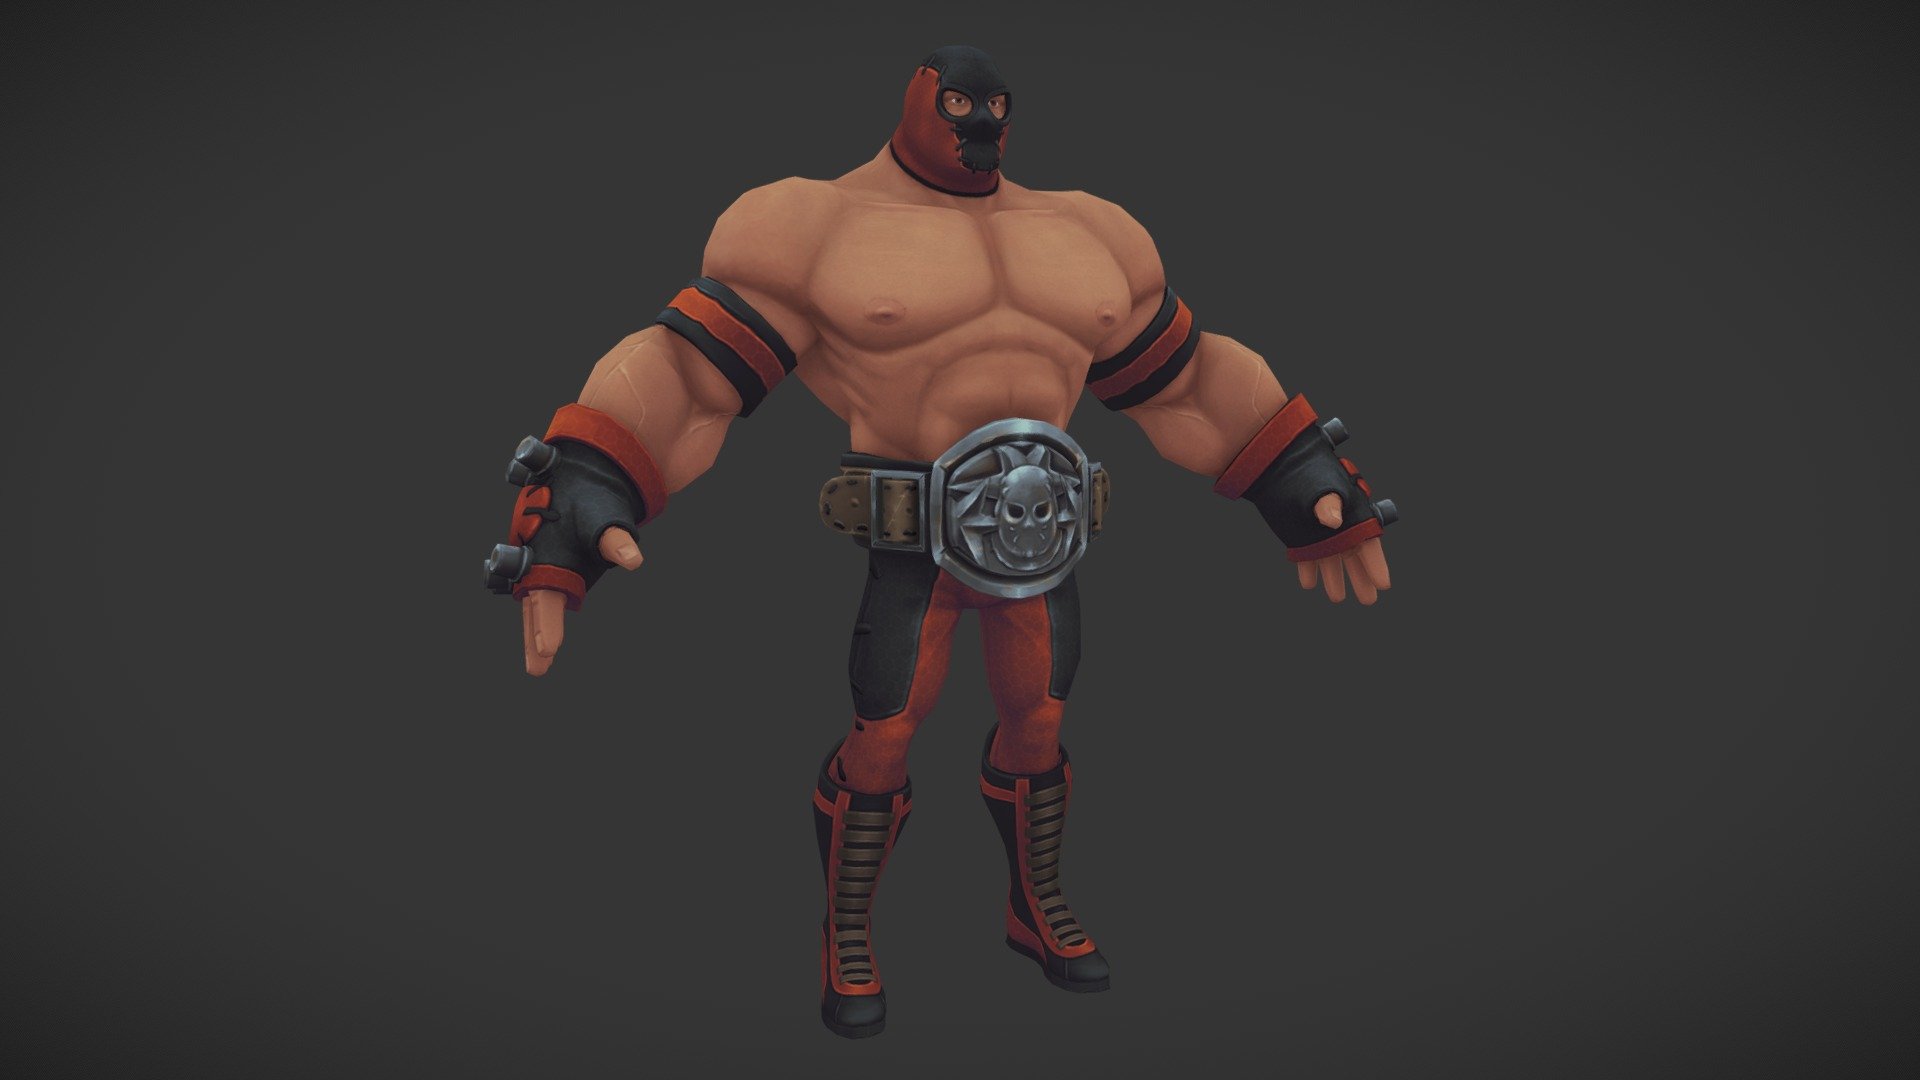 Character from mobile game “Rage Squad” - top down pvp arena brawler.
Texture: 1 diffuse - 1024

Google Play: https://play.google.com/store/apps/details?id=com.ragesquadgame
Website: https://www.ragesquadgame.com/ - Wrestler Hecto_Rage Squad Character - 3D model by Aga (@psychofobia) 3d model